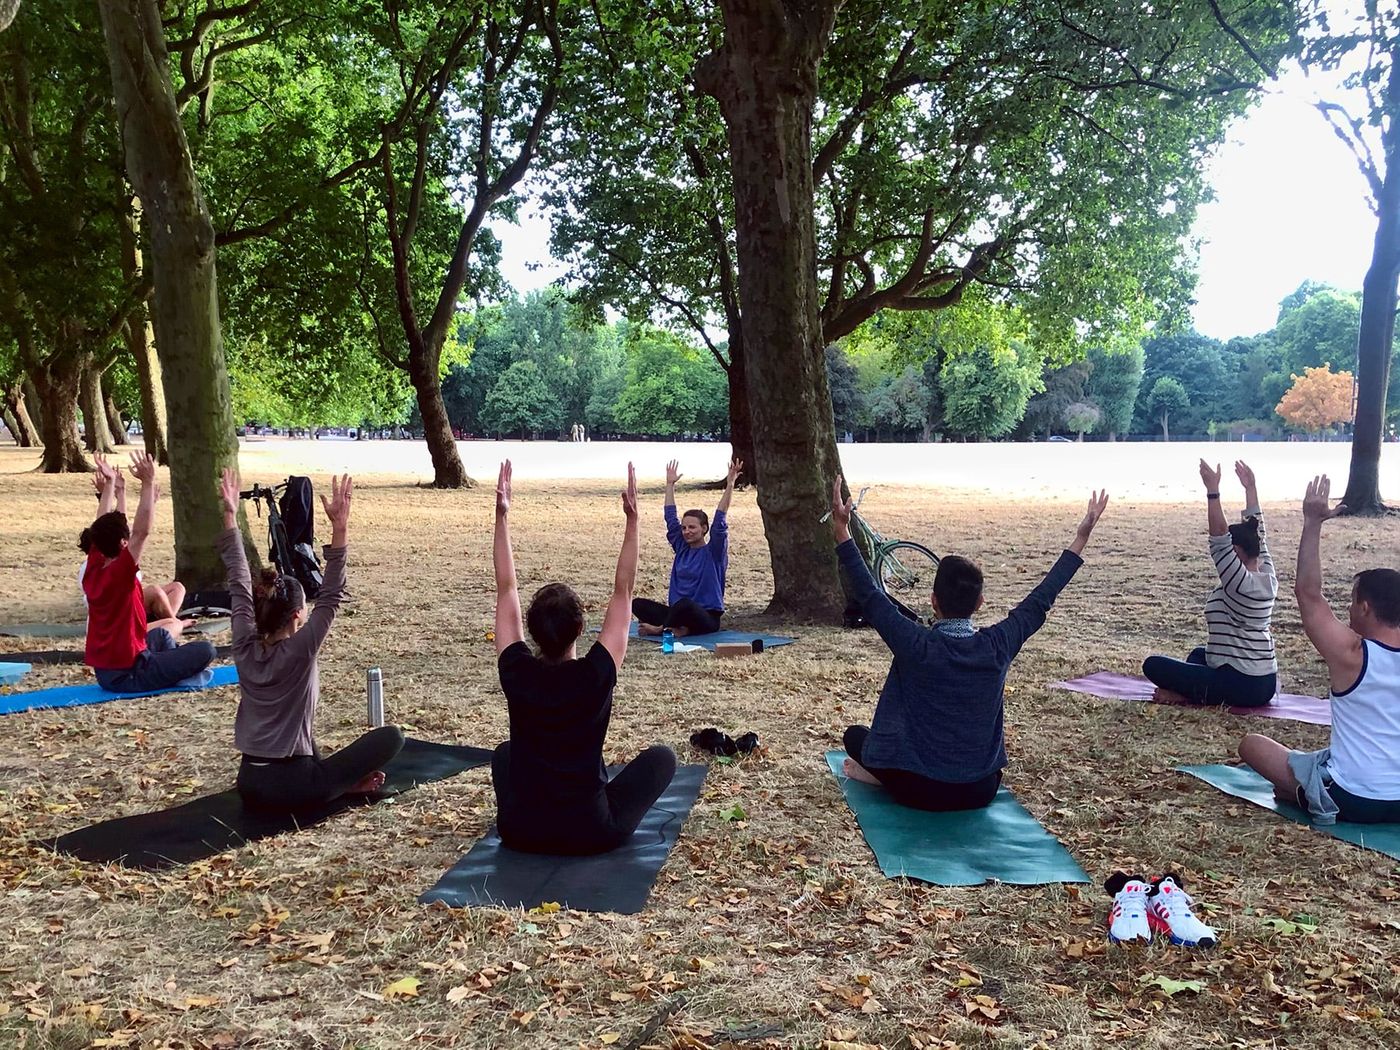 Mostly sunny and 14 degrees on Sunday. The perfect weather to end my park yoga sessions for this year. Come join one last time, it’ll be dynamic and uplifting with some restorative poses to melt into at the end. 

September 25th, 9.30–10.30am
London Fields